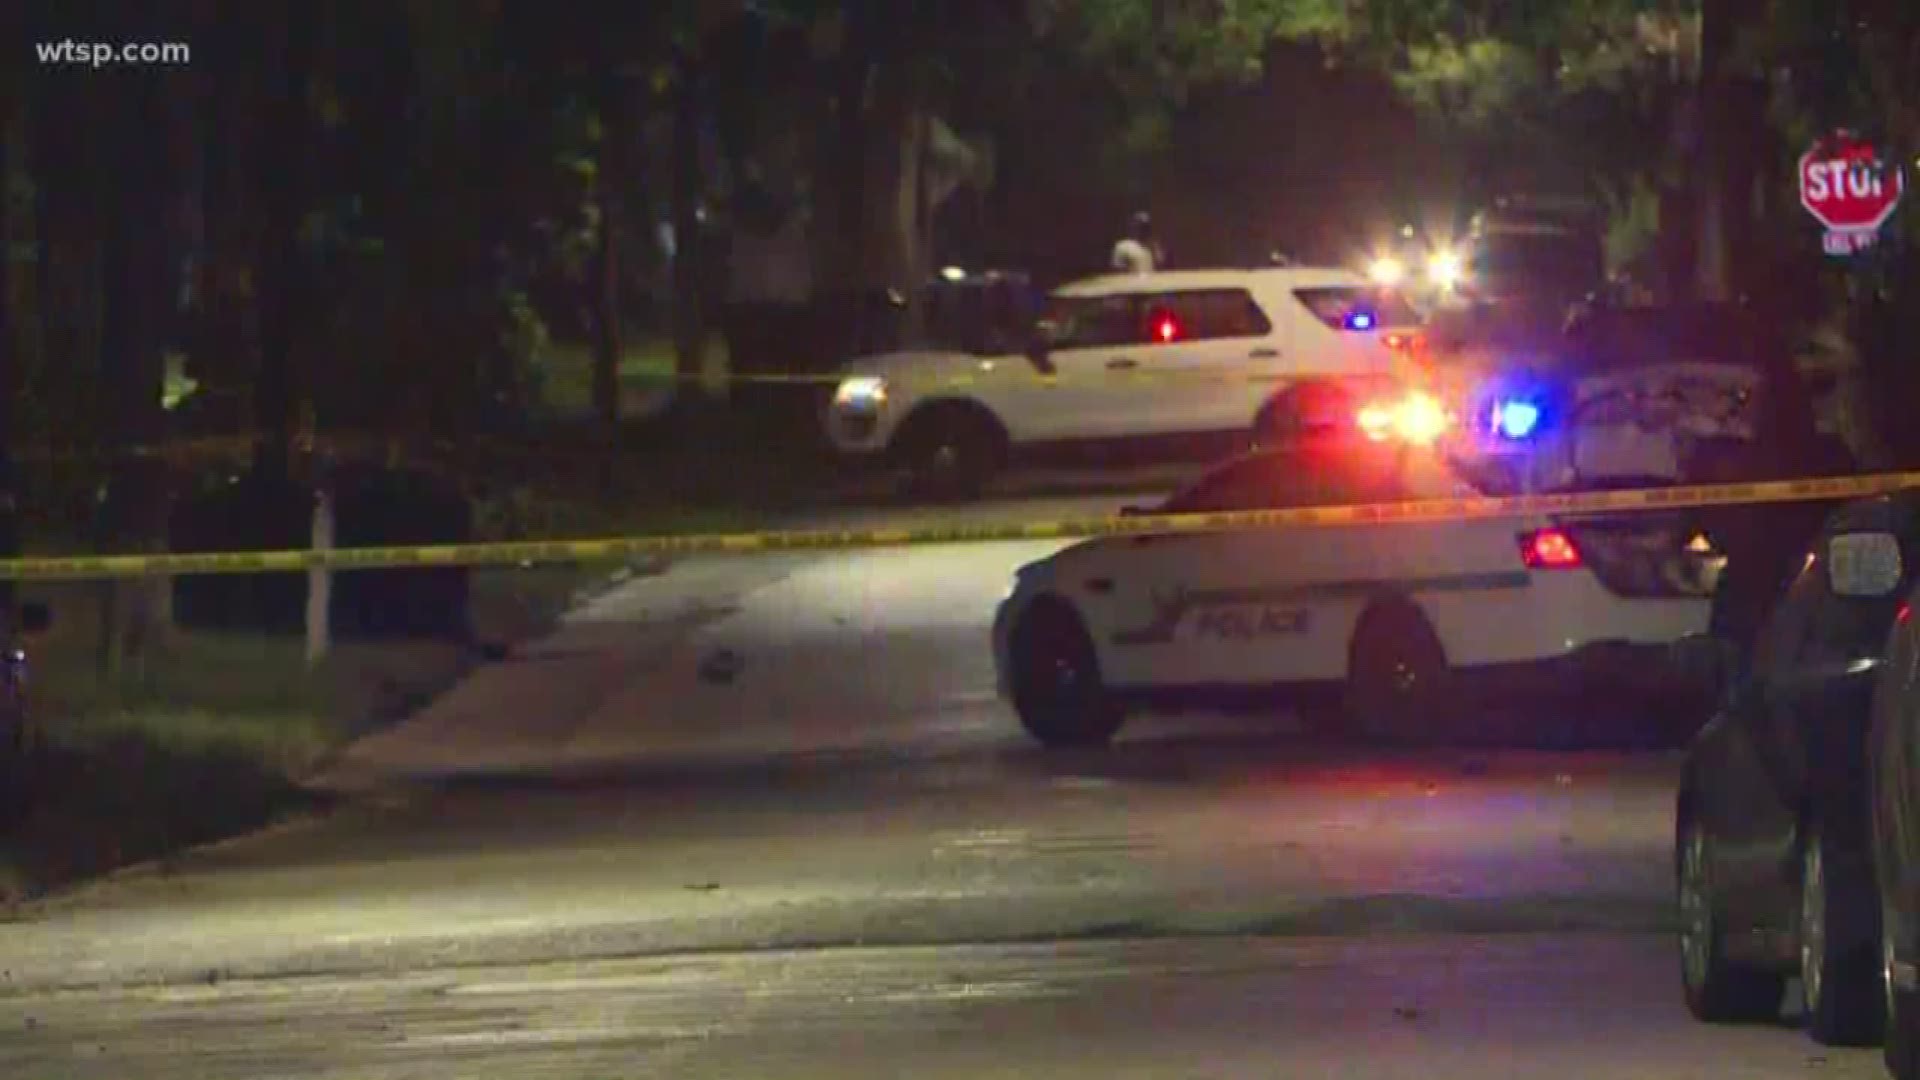 The St. Petersburg Police Department is looking for the person accused of shooting a man on Tuesday morning.

Police said the shooting happened at about 4:45 a.m. Tuesday near 12th Street and 10th Avenue South. Police say the shooter ran away. https://on.wtsp.com/2yI7IXq